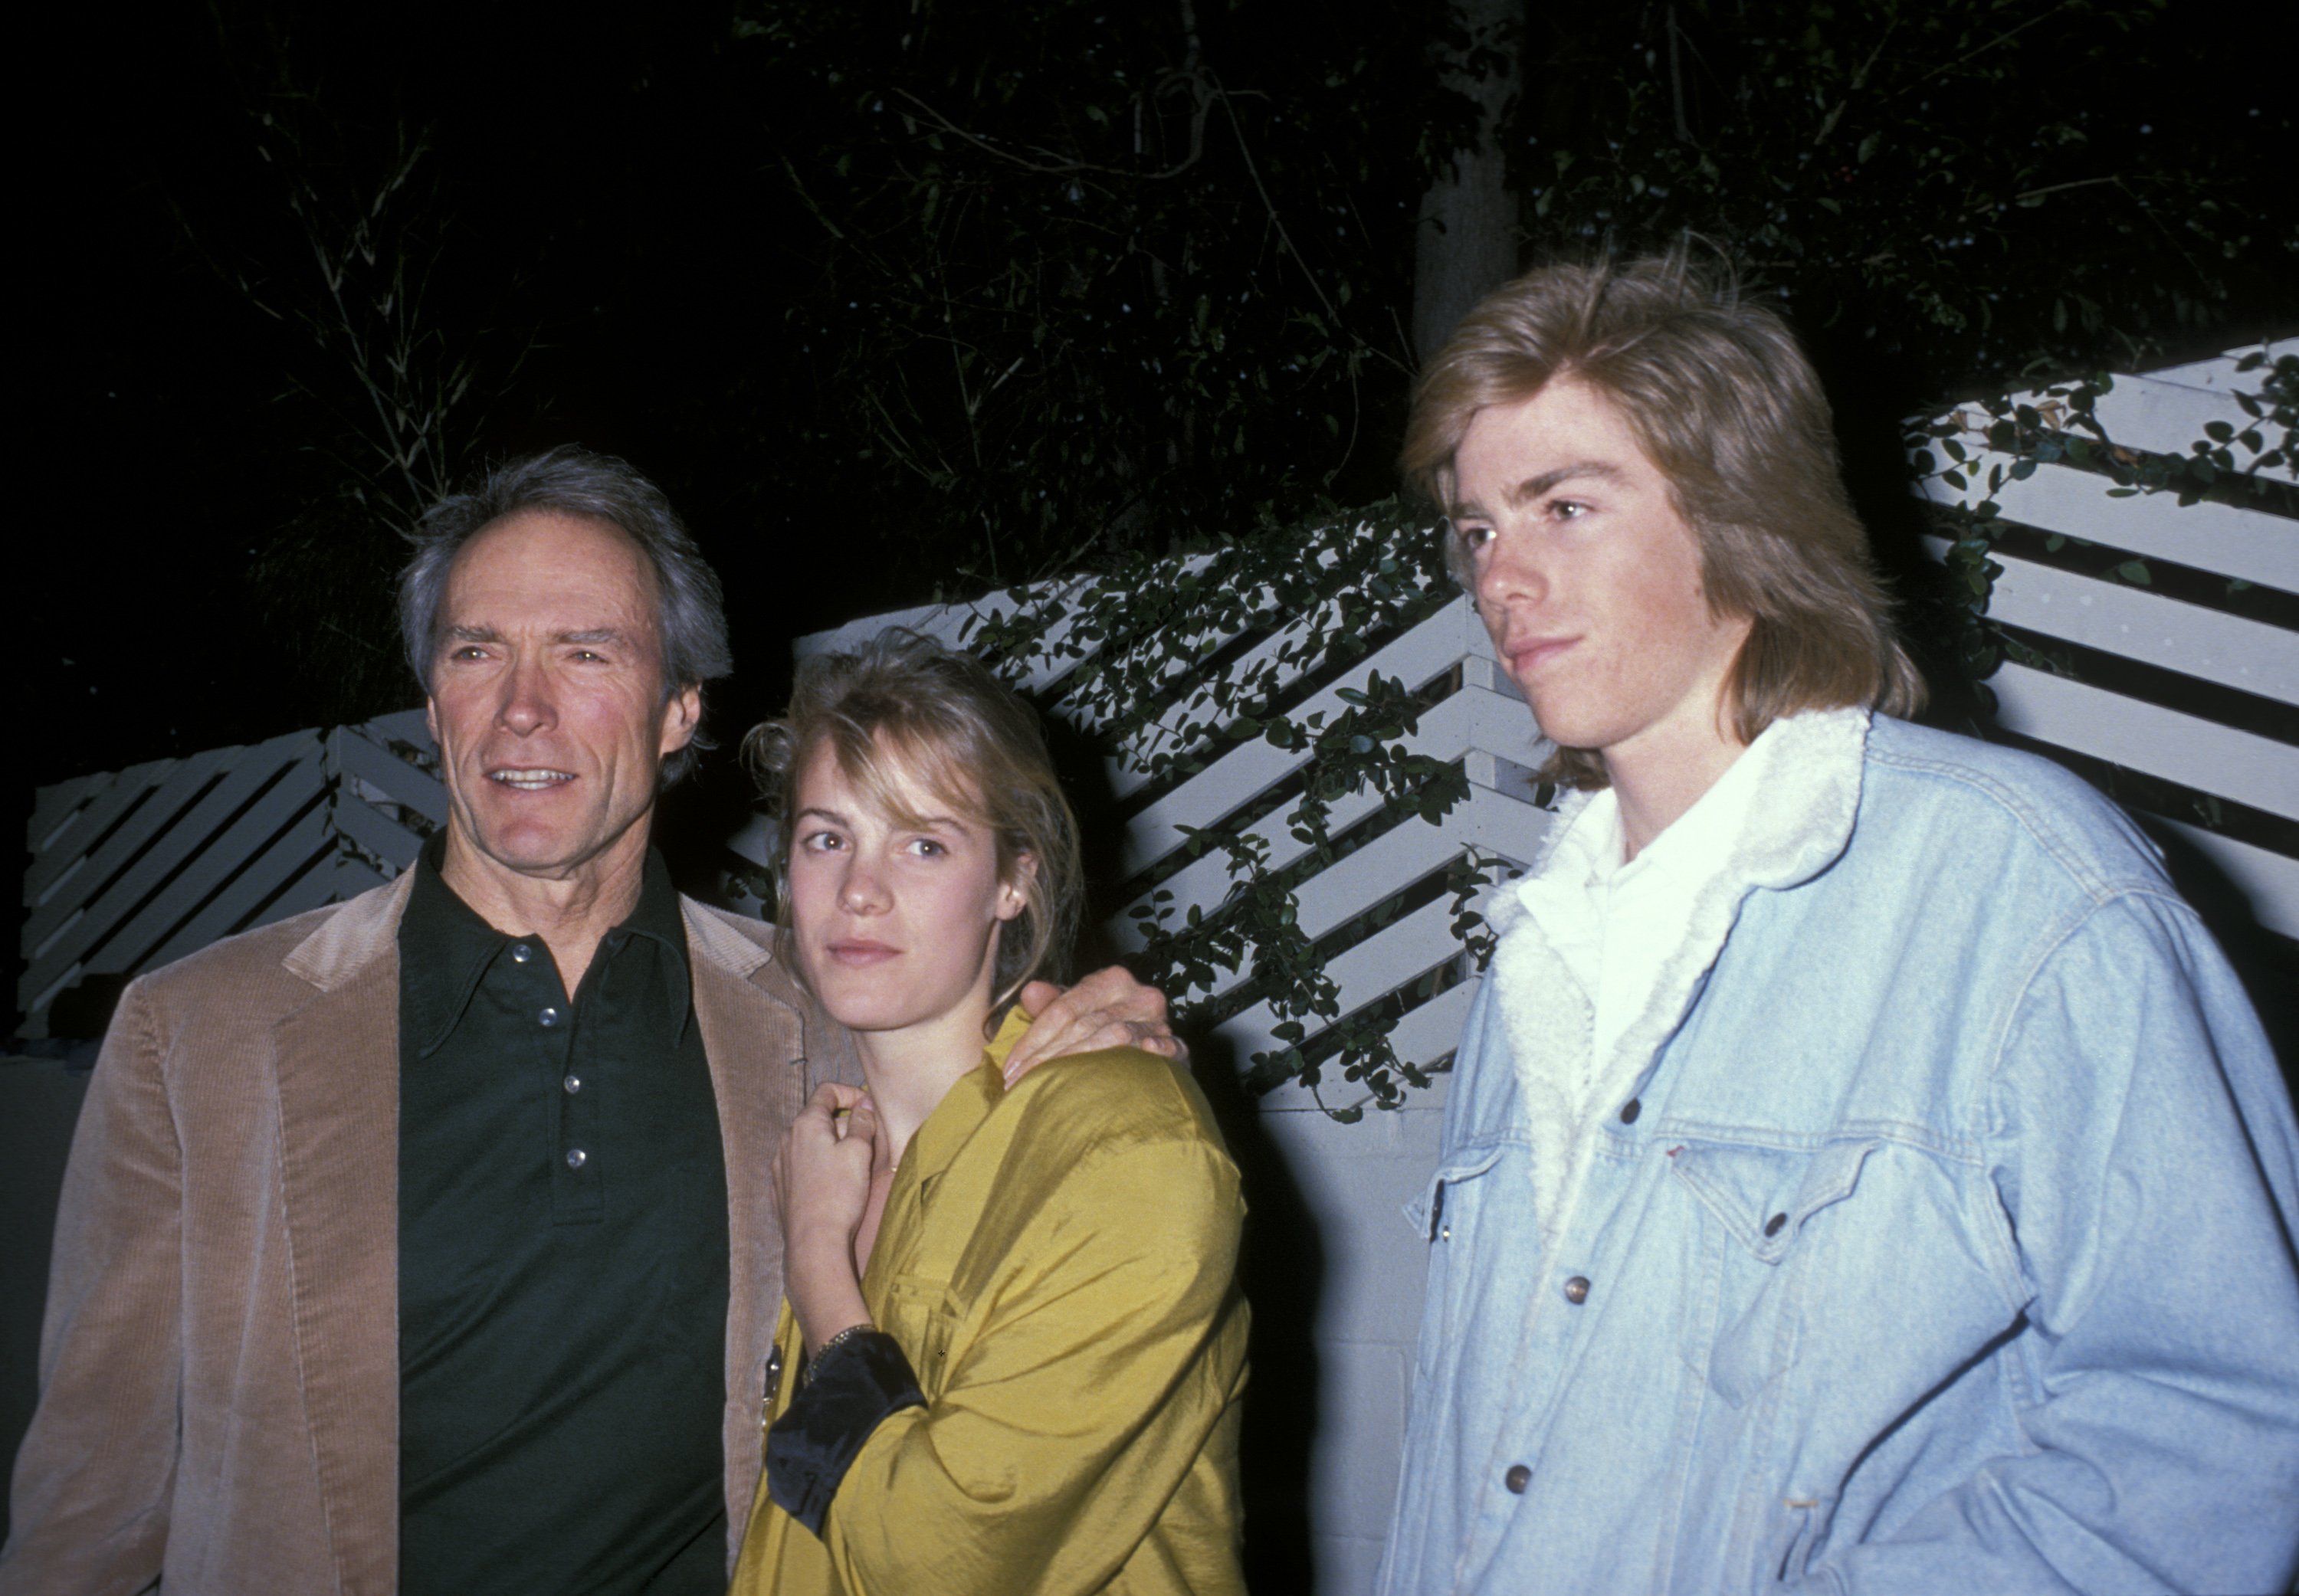 Clint Eastwood with daughter Alison Eastwood and son Kyle Eastwood | Photo: Ron Galella/Ron Galella Collection via Getty Images